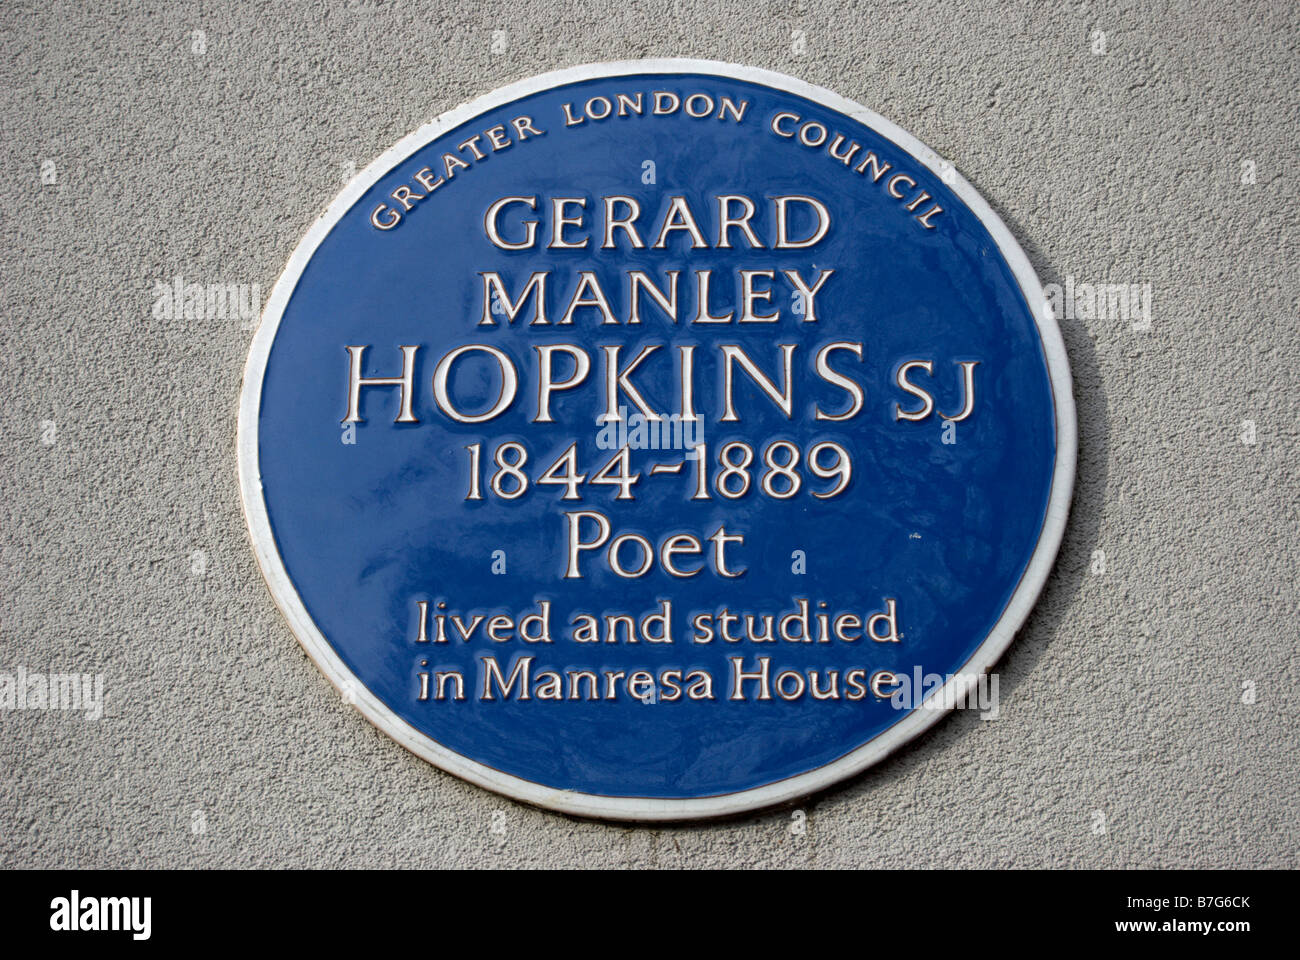 greater london council blue plaque marking a former home of poet gerard manley hopkins, roehampton, southwest london, england Stock Photo